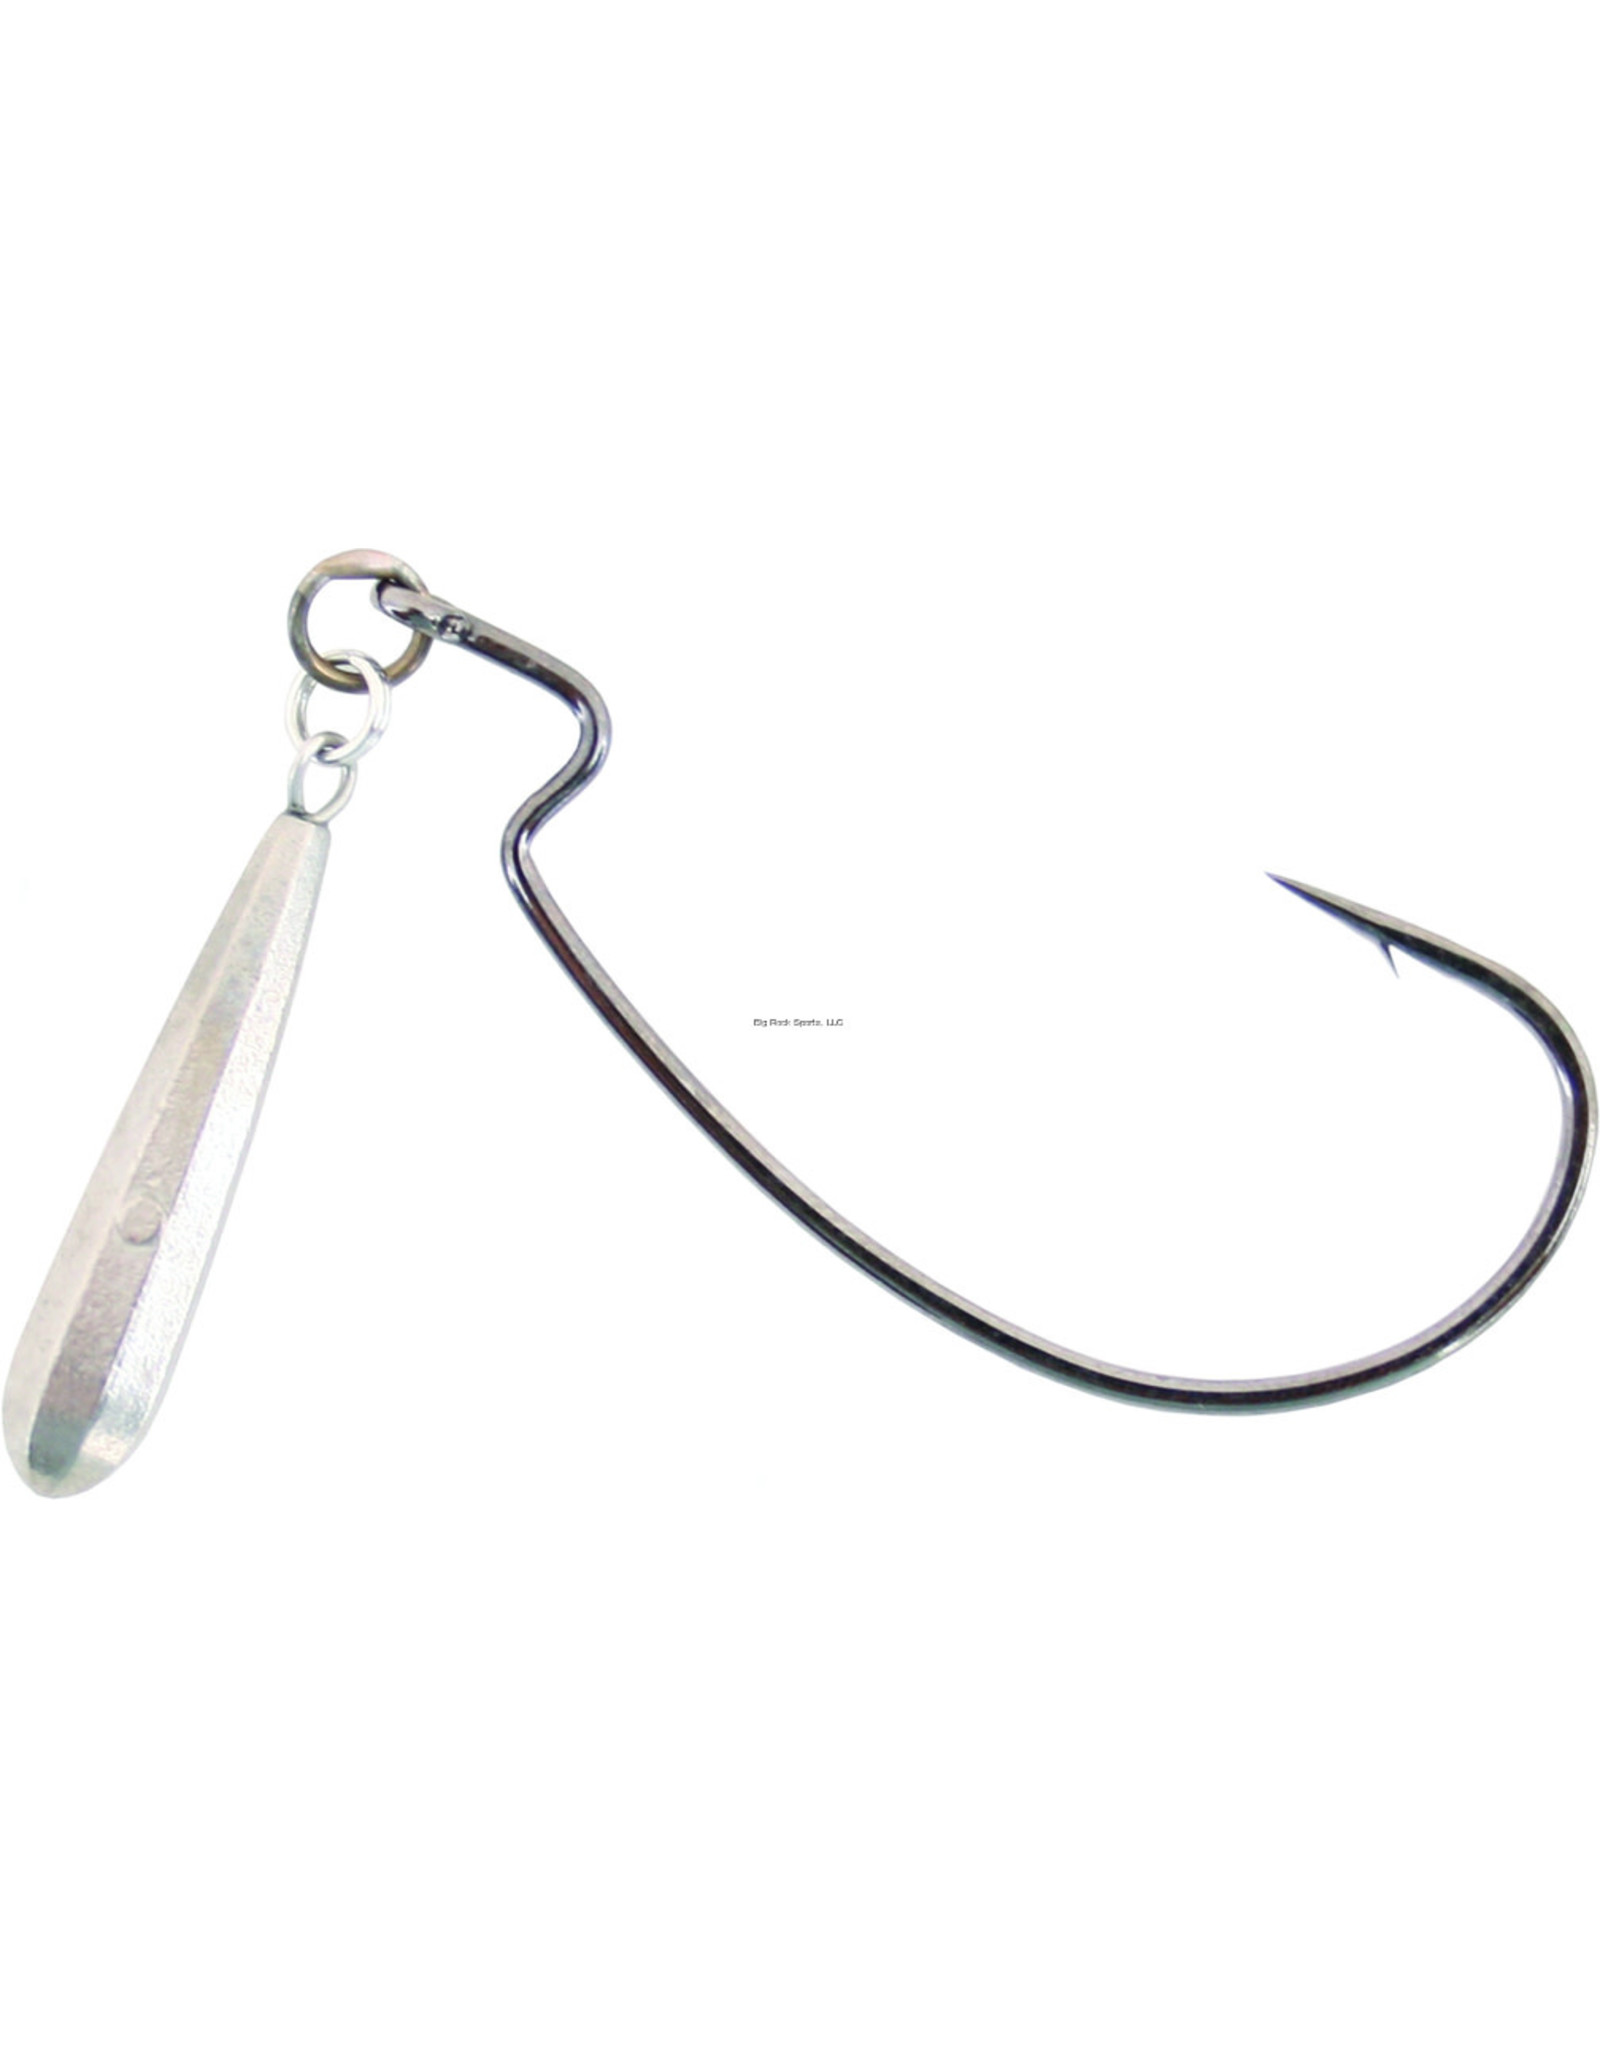 Owner Owner 5117-033 JigRig Soft Plastic Hook with Tungsten Weight, Size 3/0, 3/16 oz, Needle Point, Z Bend, Light Wire, Black Chrome, 2 per Pack